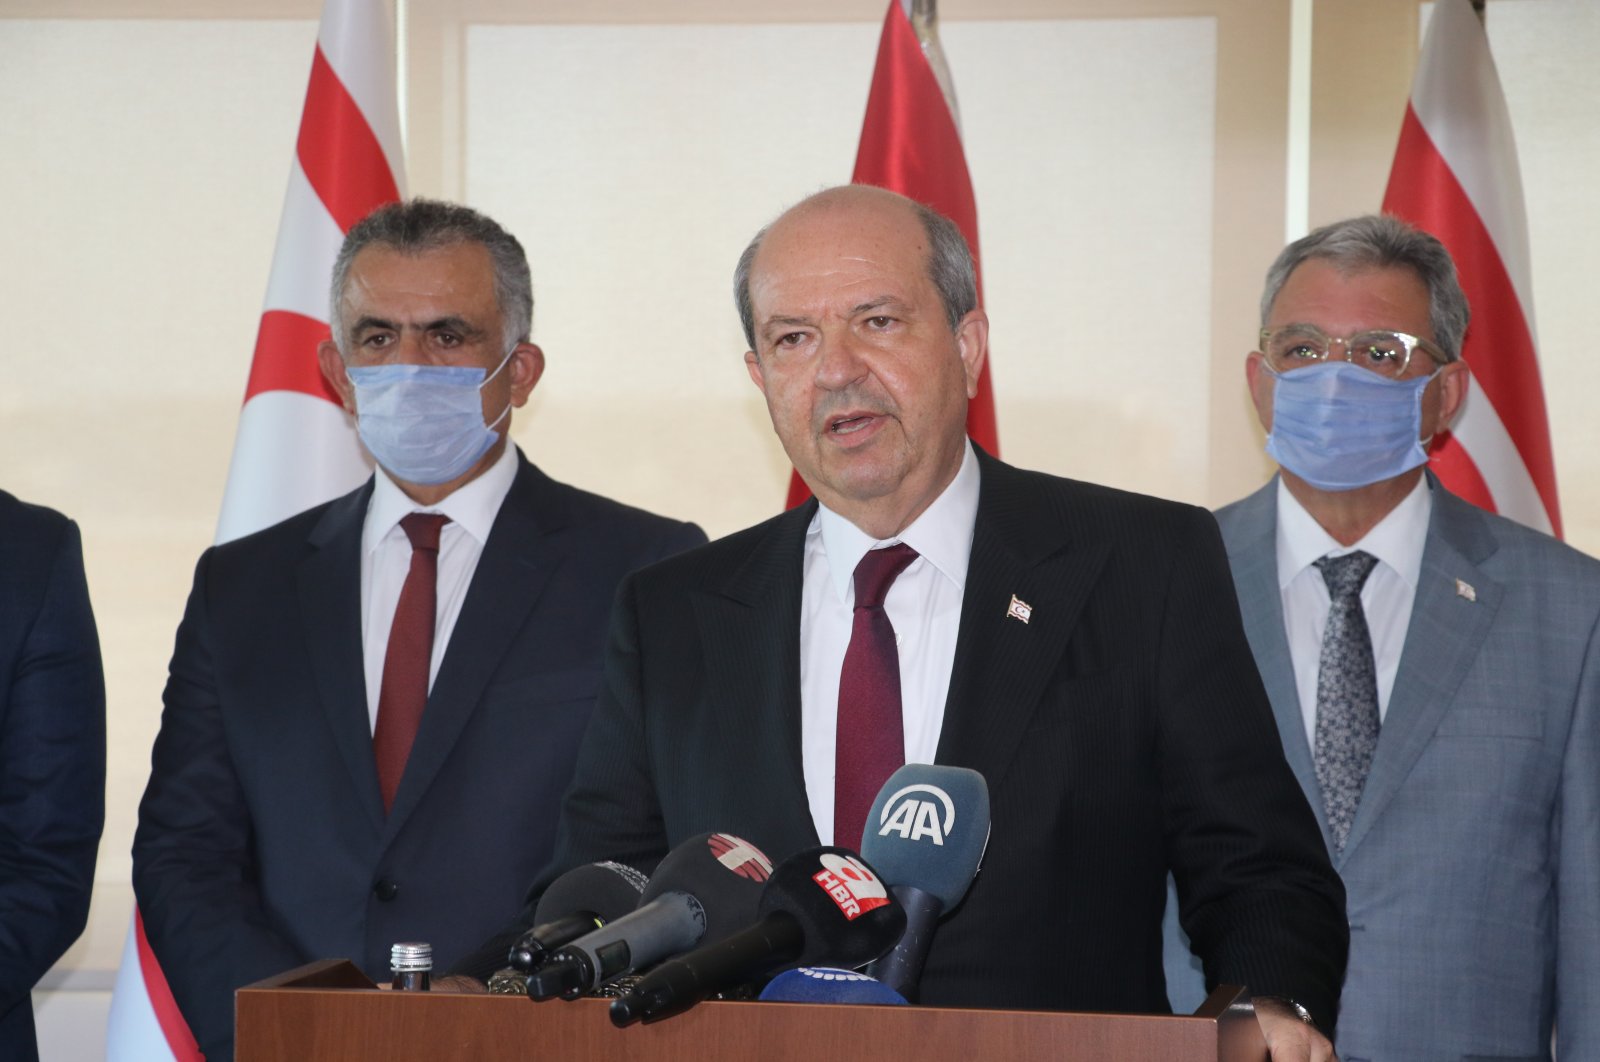 TRNC PM Ersin Tatar (C) gives a press conference in Nicosia's Ercan International Airport after returning to the island of Cyprus after official talks in Turkey, Aug. 5, 2020 (AA Photo)